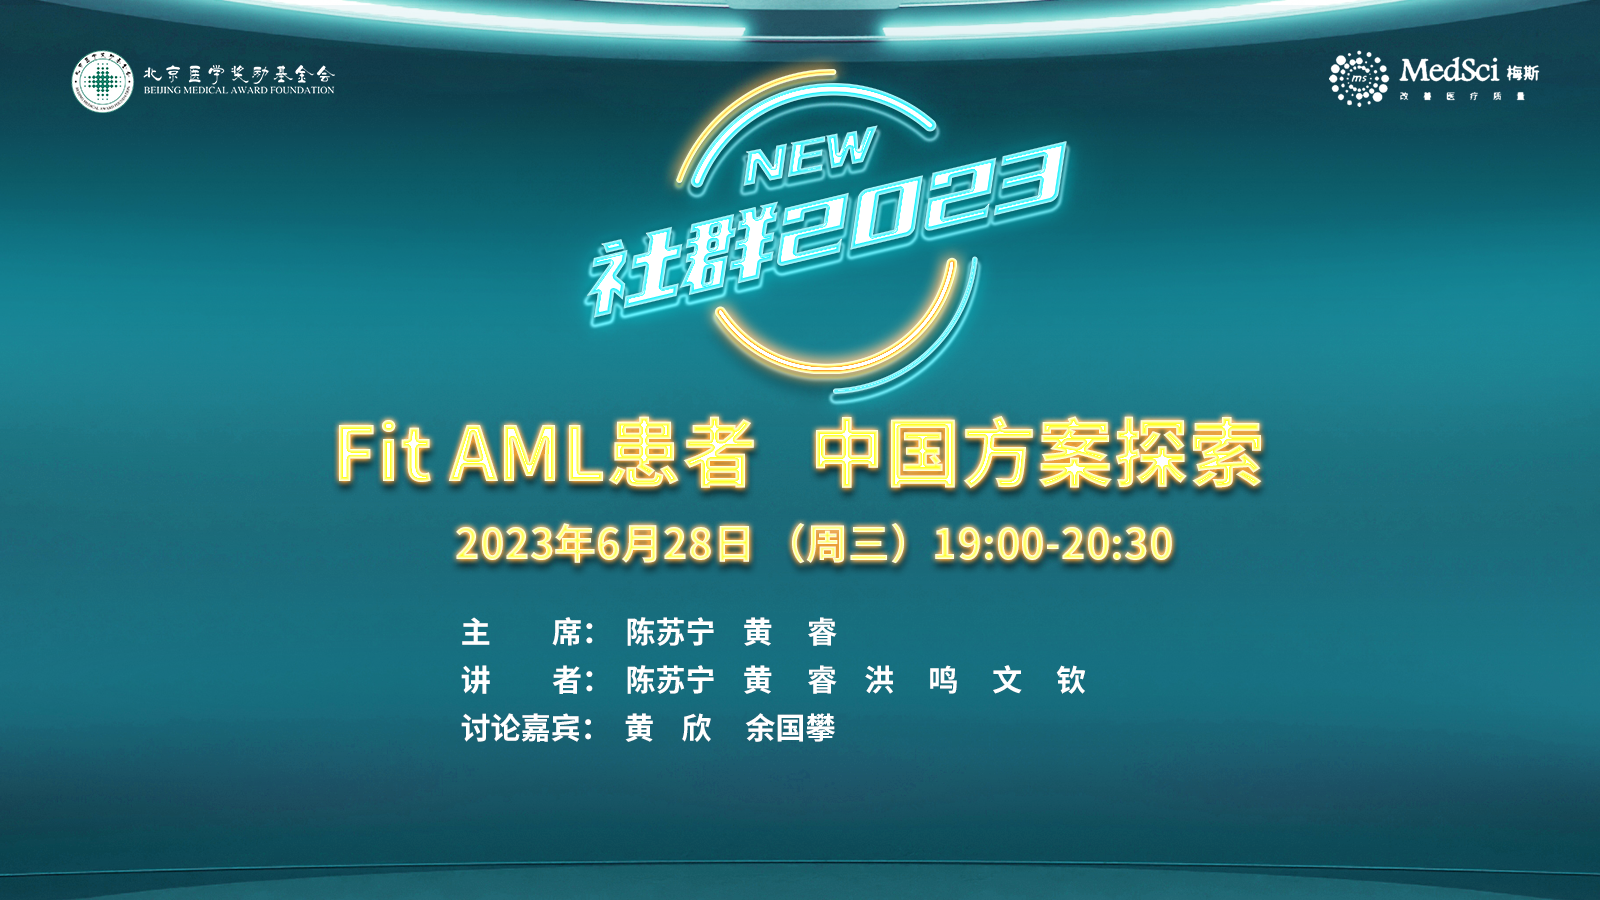 Fit <font color="red">AML</font>患者中国方案探索